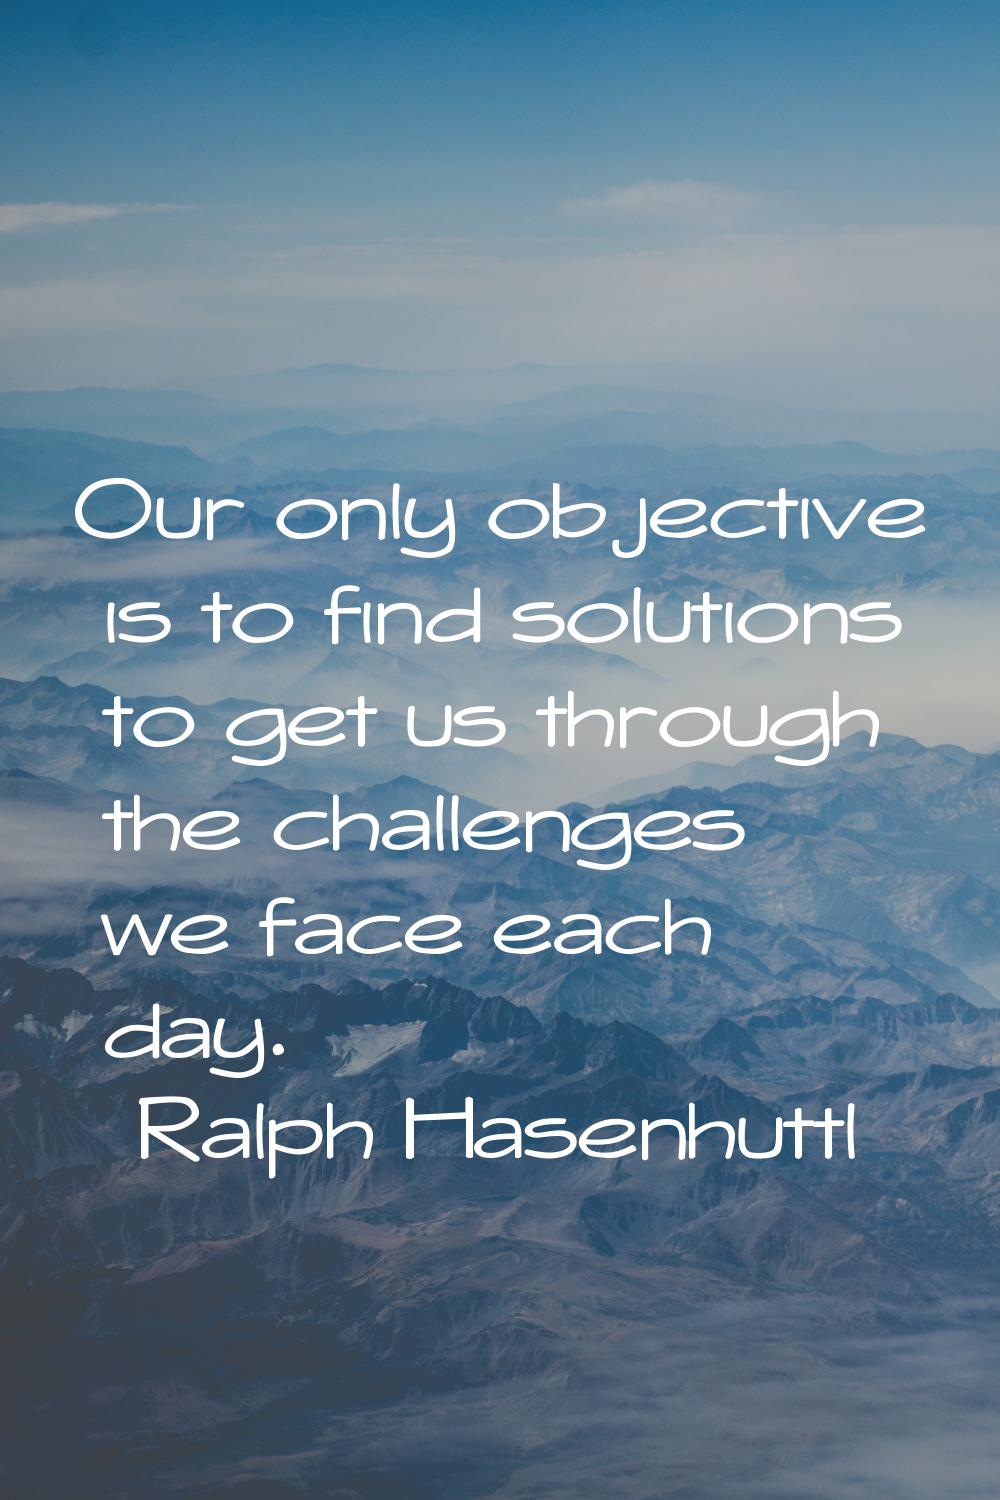 Our only objective is to find solutions to get us through the challenges we face each day.